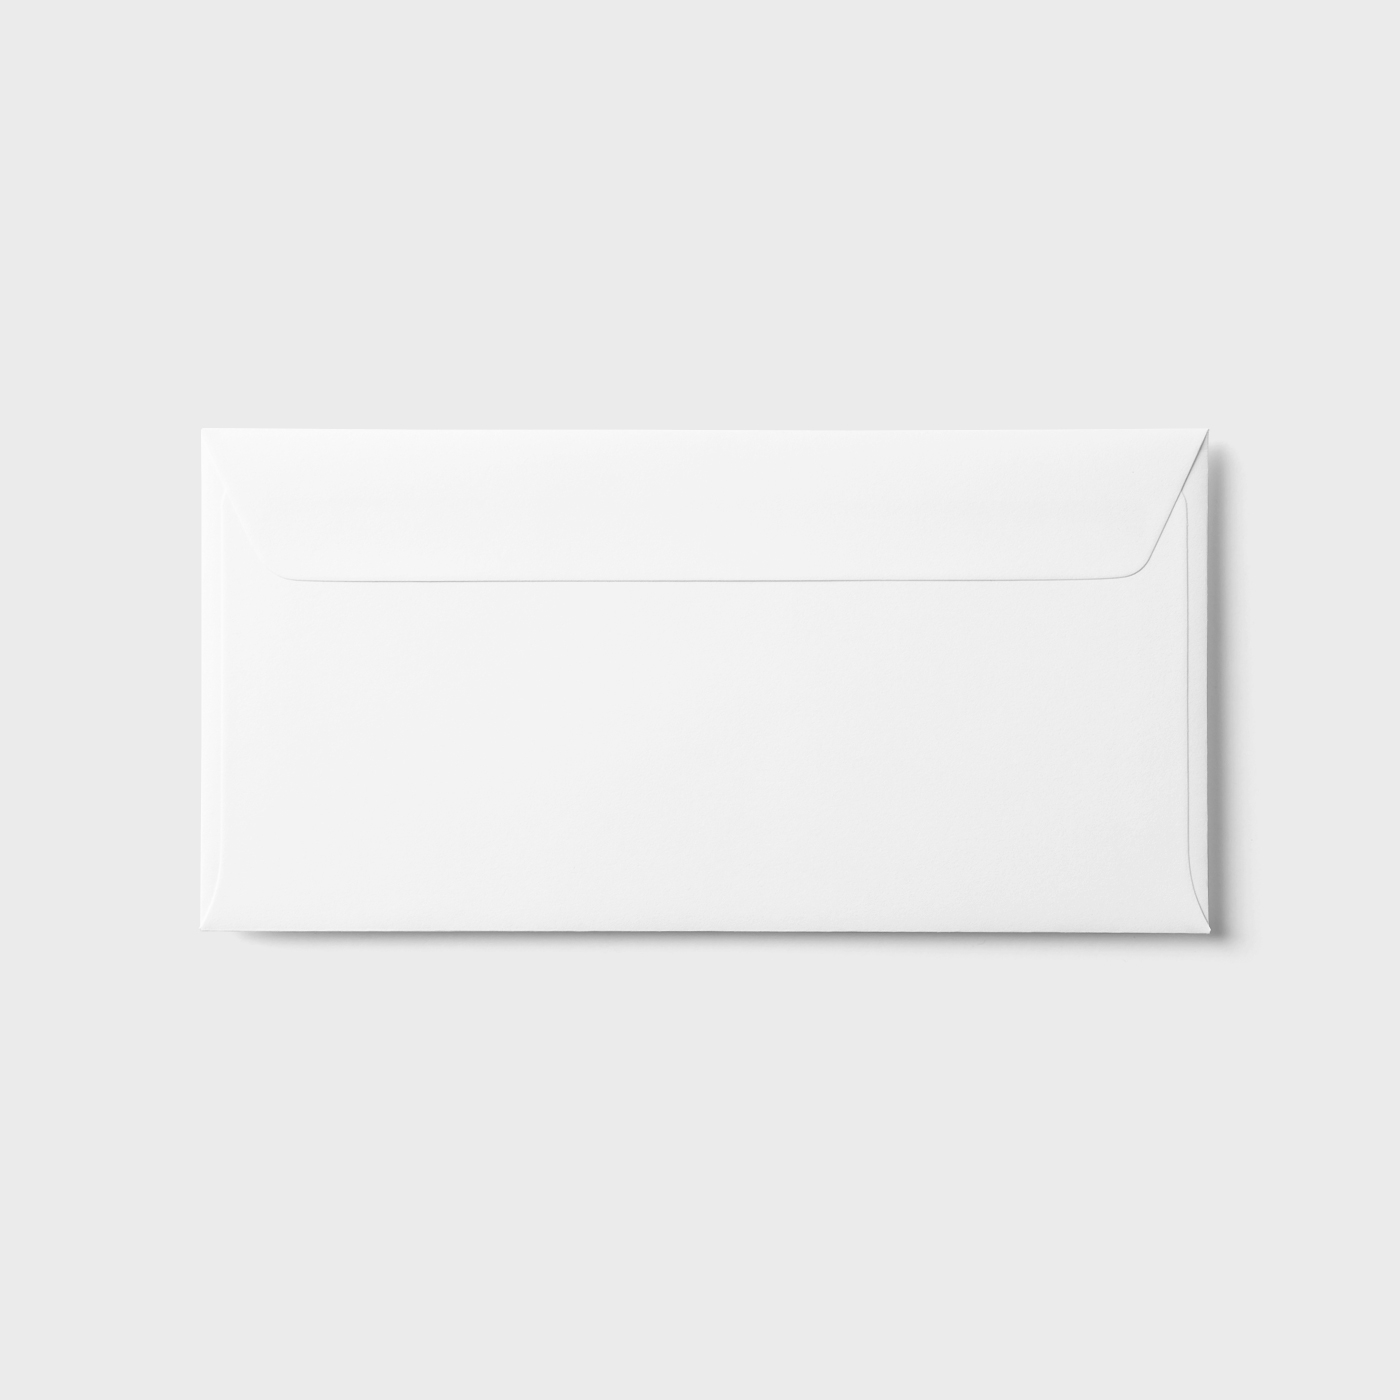 Top View of a Classic Rectangular Envelope Mockup FREE PSD